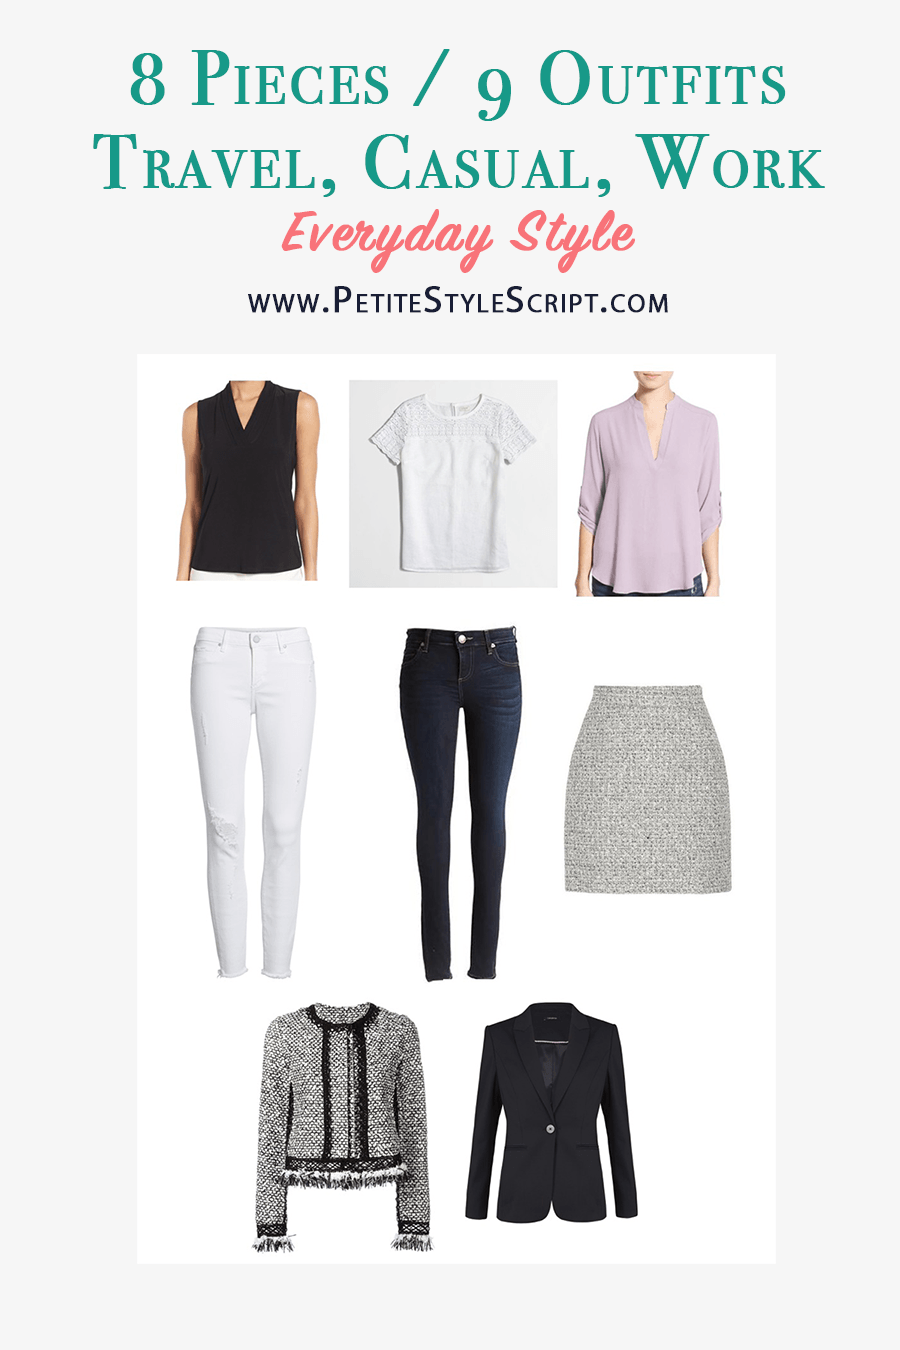 Spring Packing List | Spring Travel Capsule Wardrobe for women | Spring outfit ideas | Free download | Petite fashion and style blog | 8 piece capsule wardrobe 9 outfit ideas | Spring style | Office style | Casual outfits work outfits